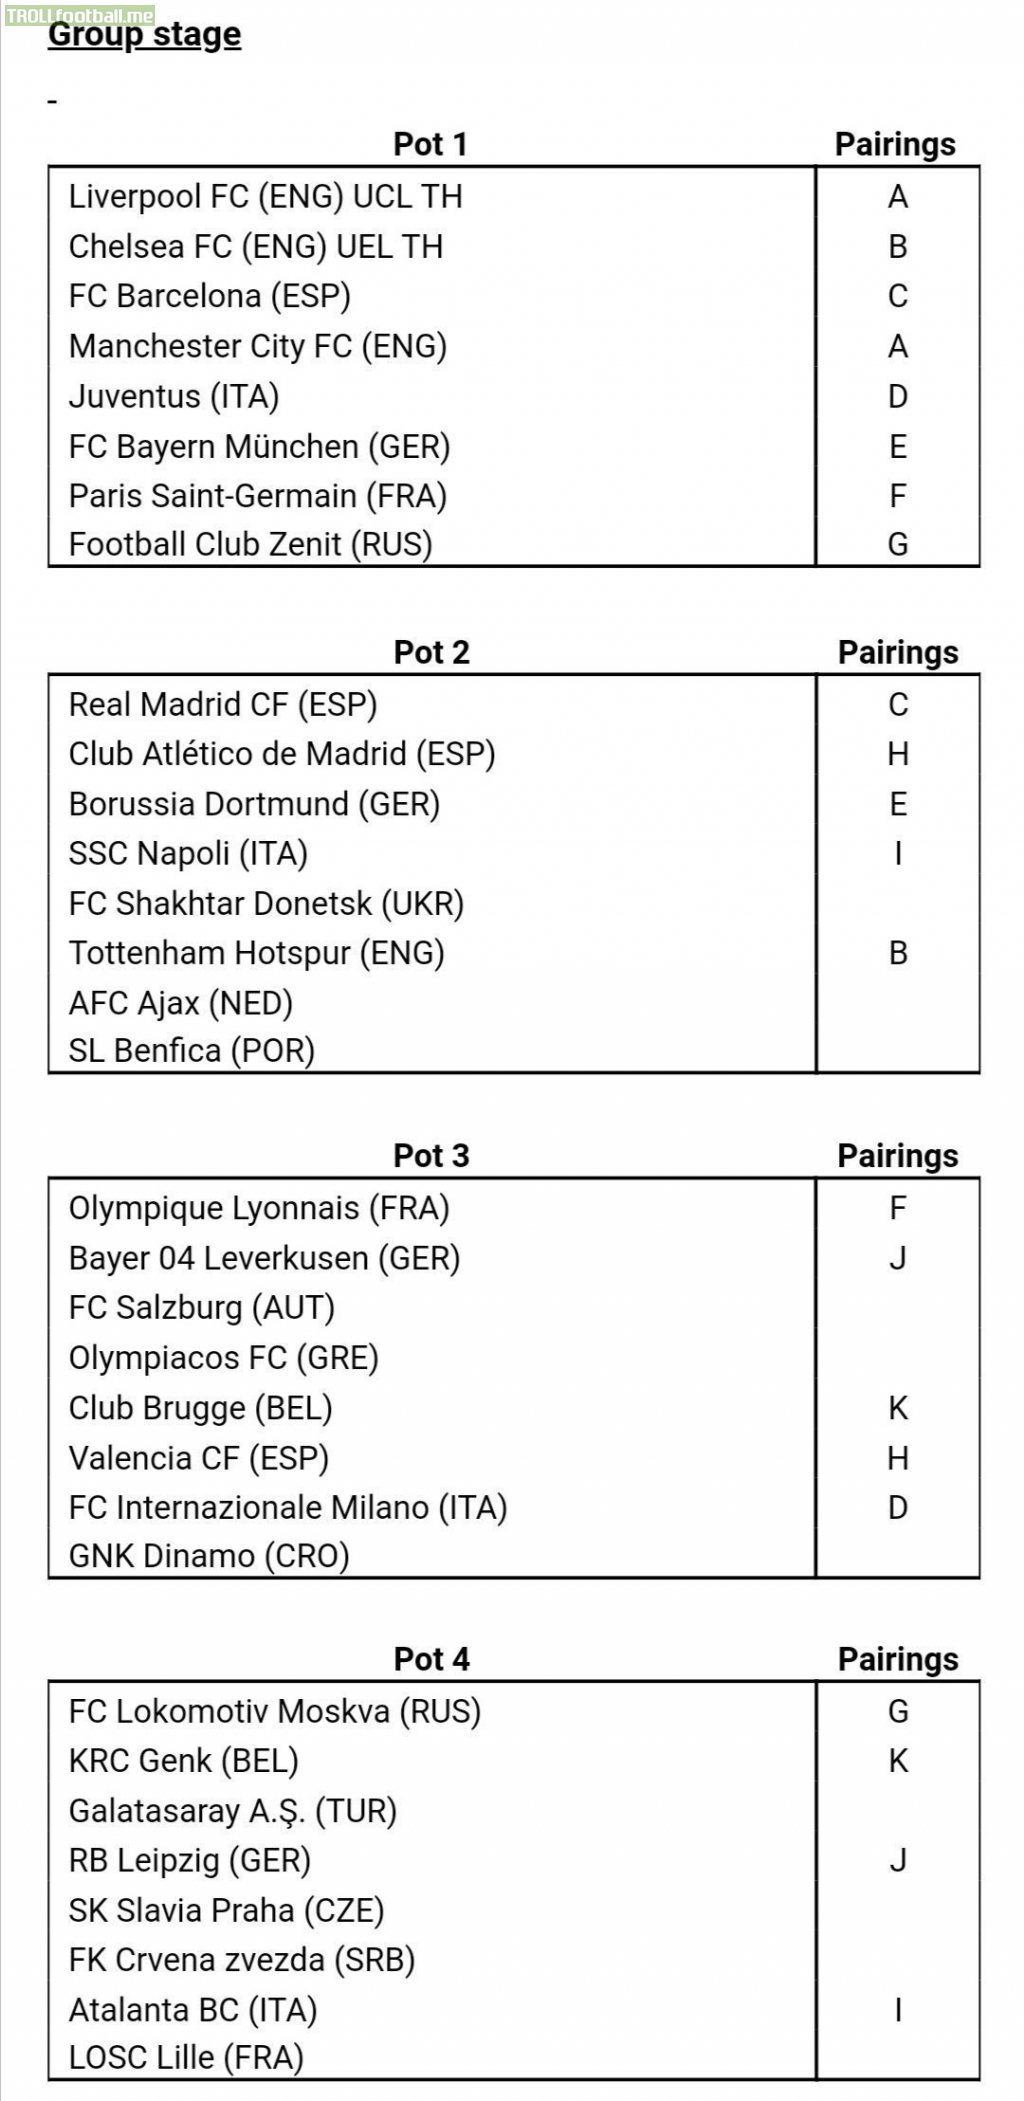 Domestic Pairings in the UCL Group Stage draw: Teams marked with the same alphabetical character cannot play on the same weekday.